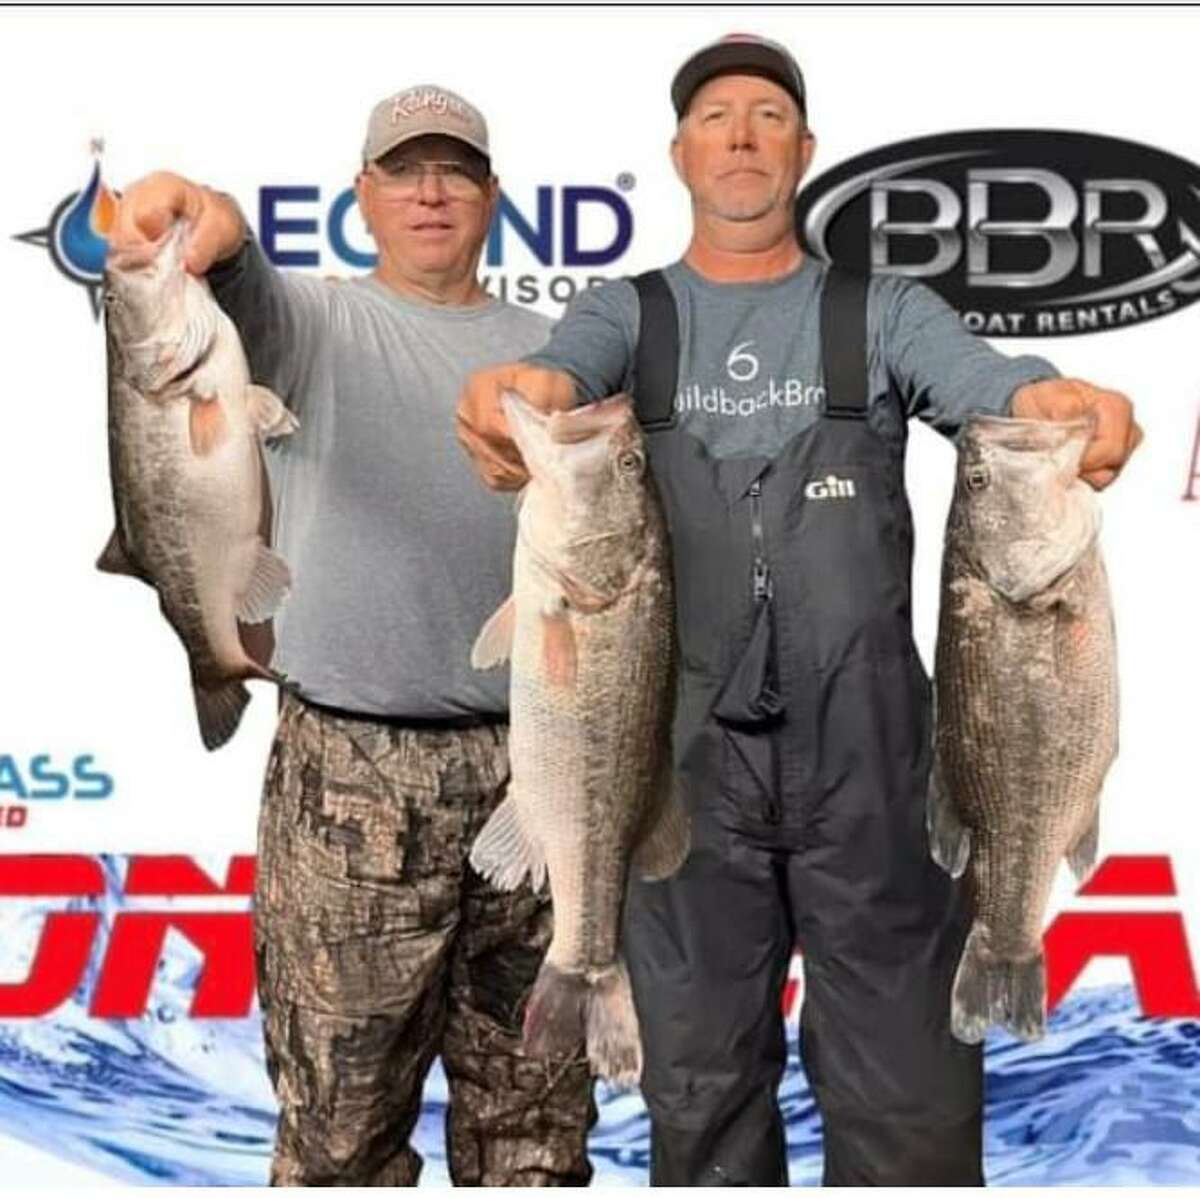 David Bozarth and Russell Cecil came in third place in the CONROEBASS Tuesday Tournament with a stringer weight of 12.03 pounds.